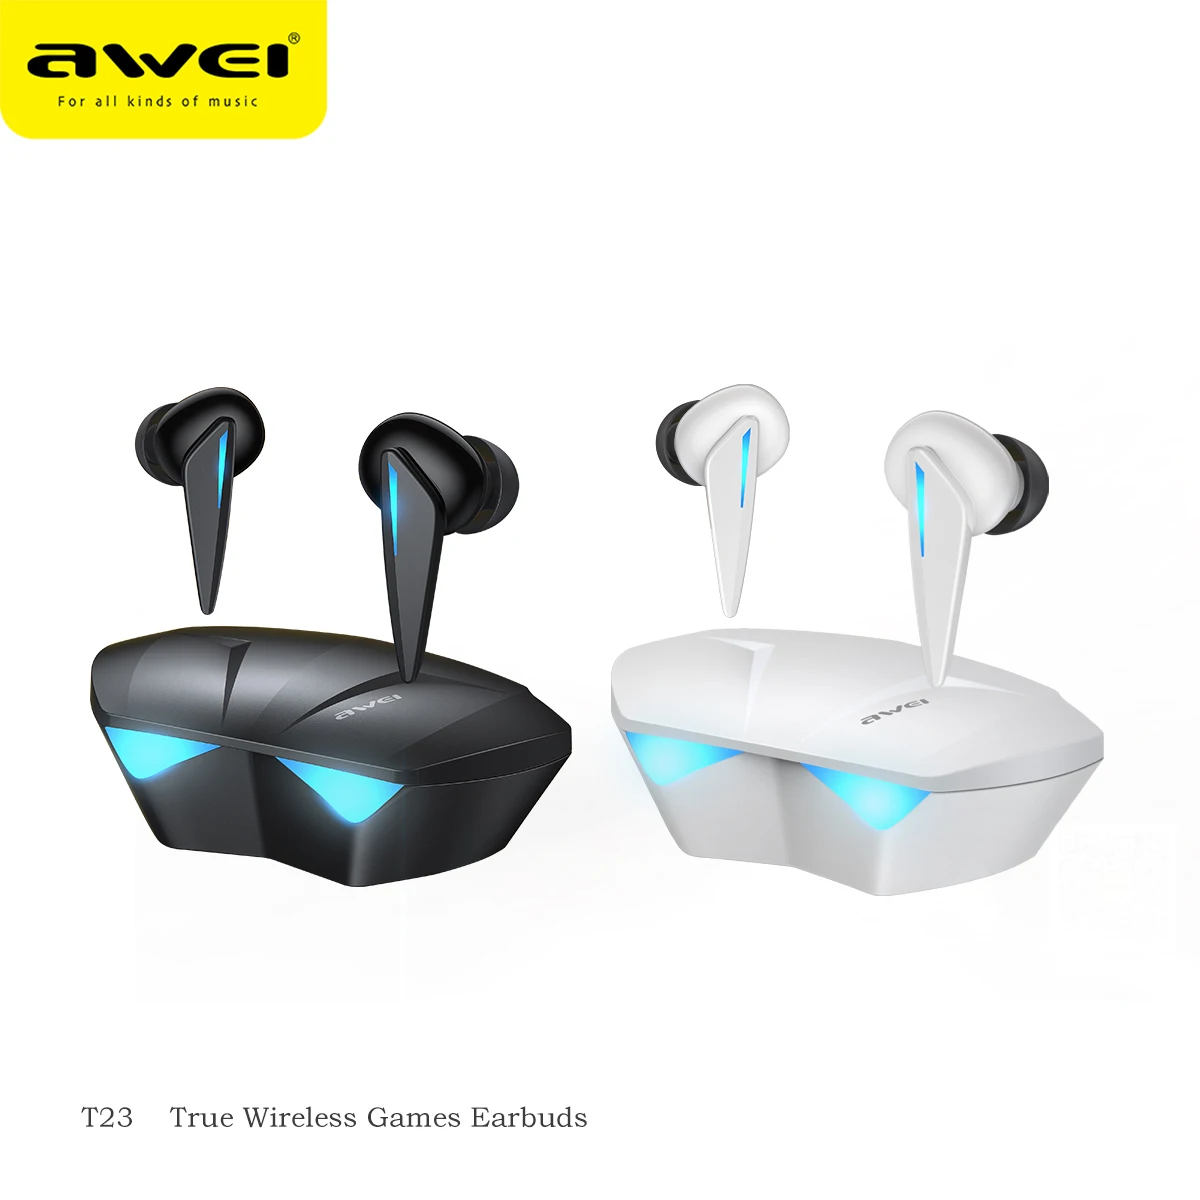 

True Wireless Tws Earbuds Stereo Wireless Headphones Long Standby With Charging Bin For Ios Android Game Headset Half In Ear